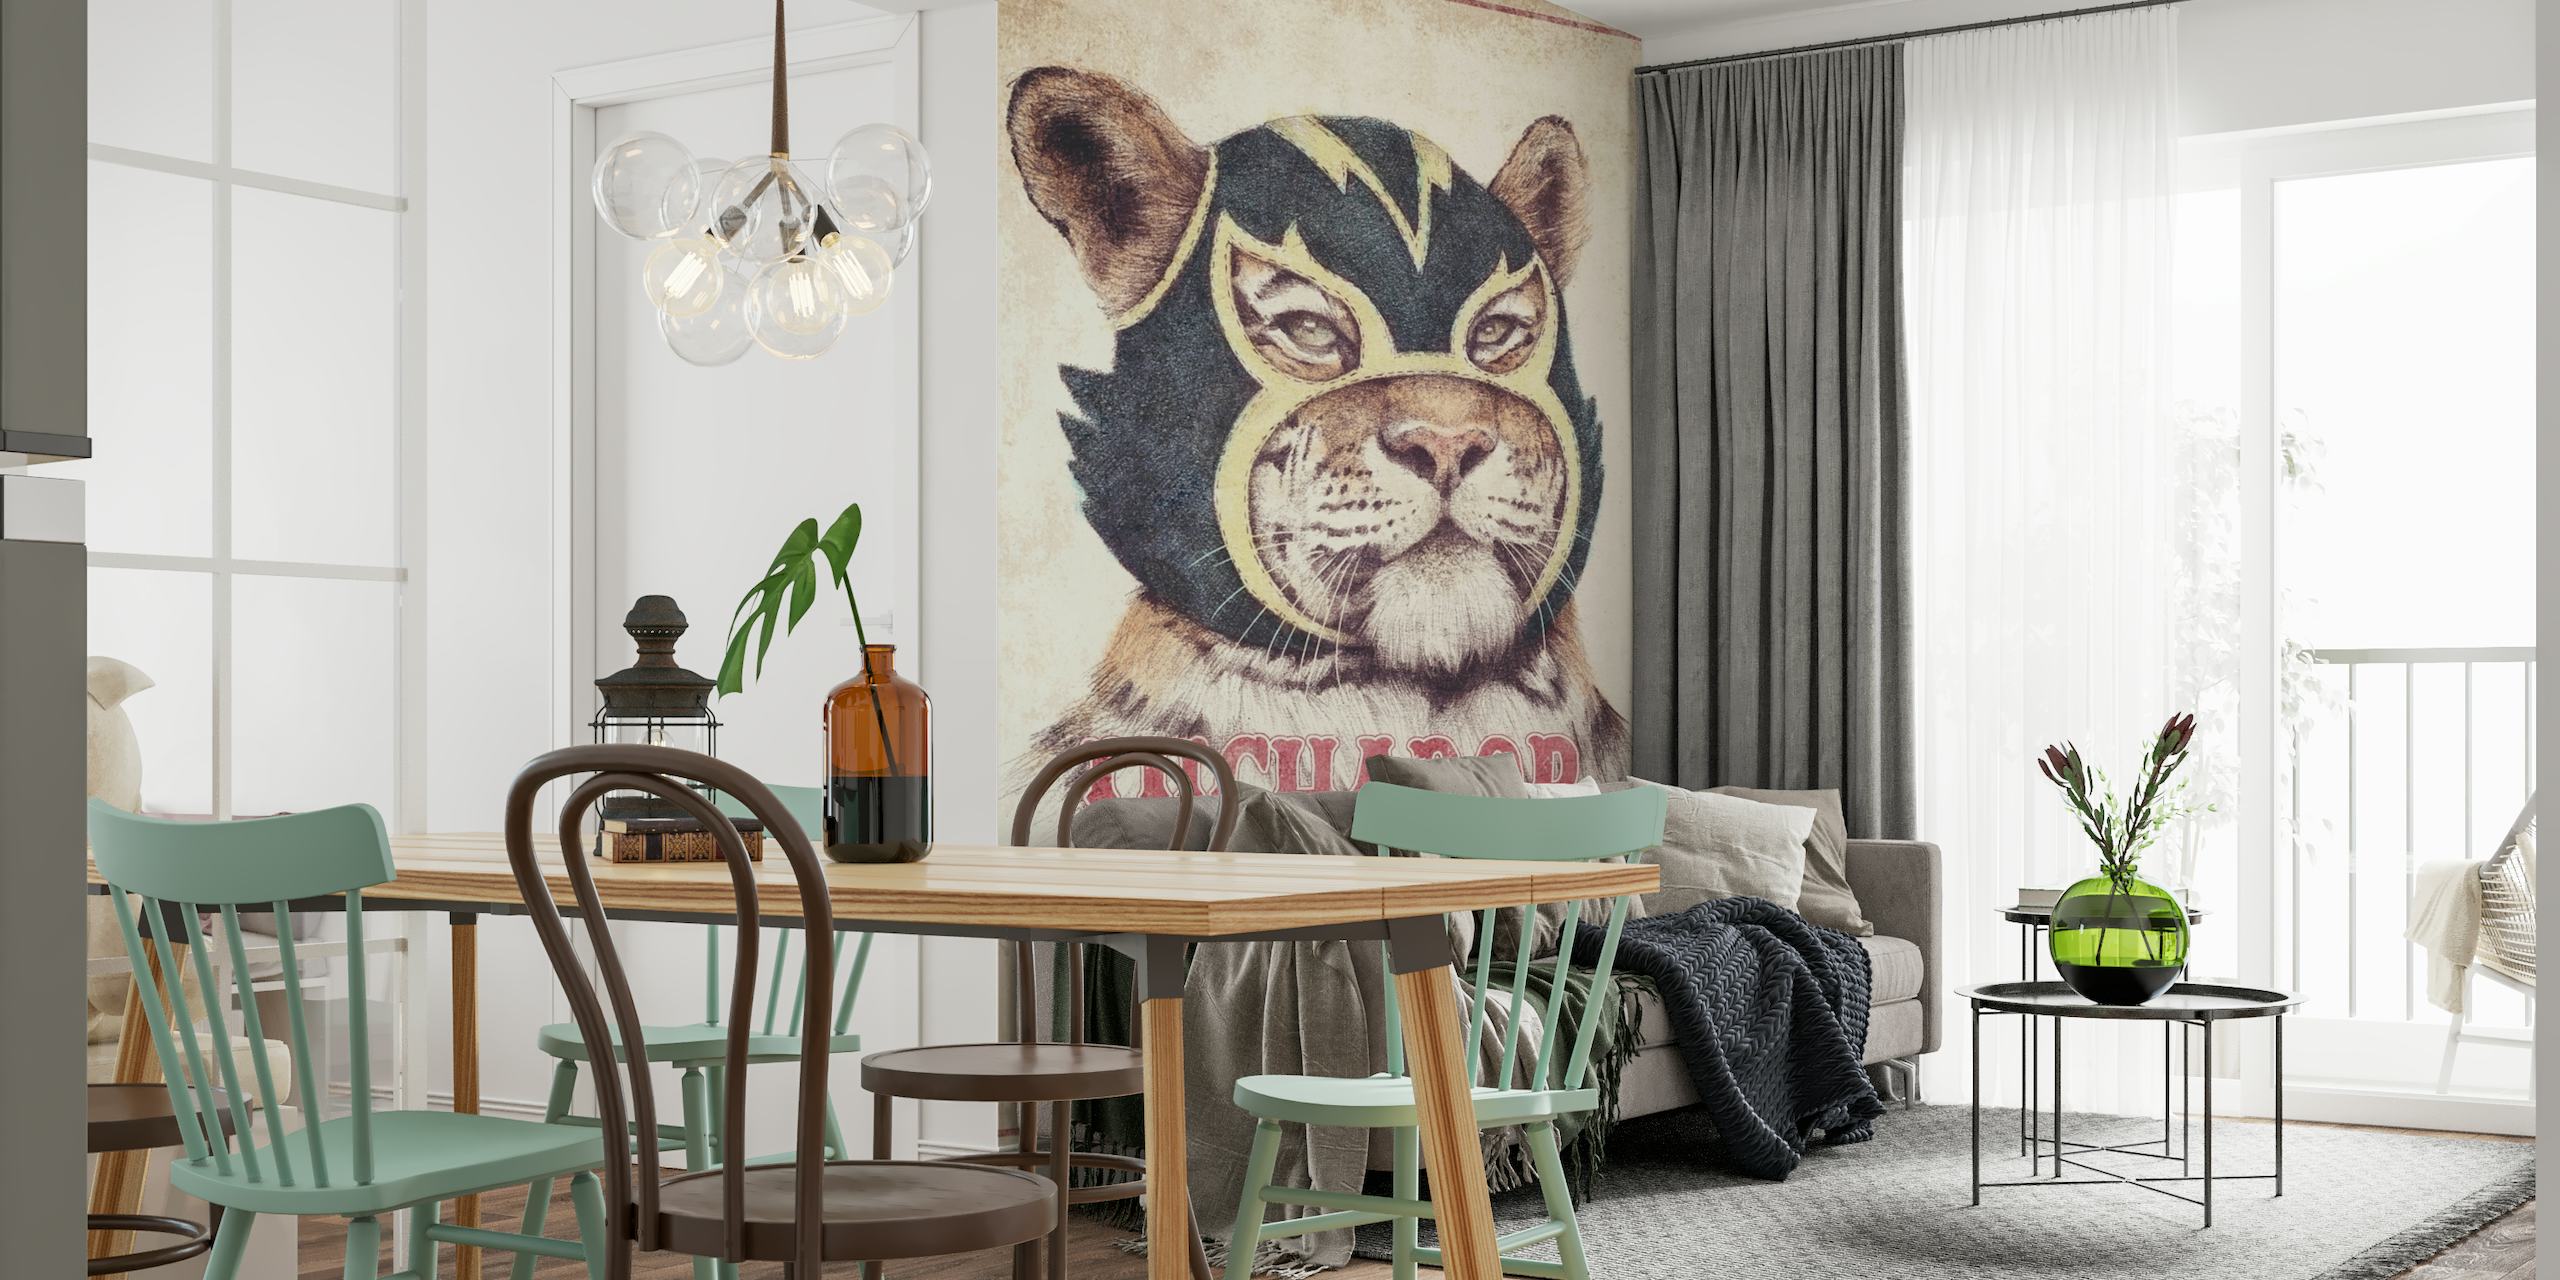 Bright and Colorful El Kitty Mexican Tiger Wall Mural